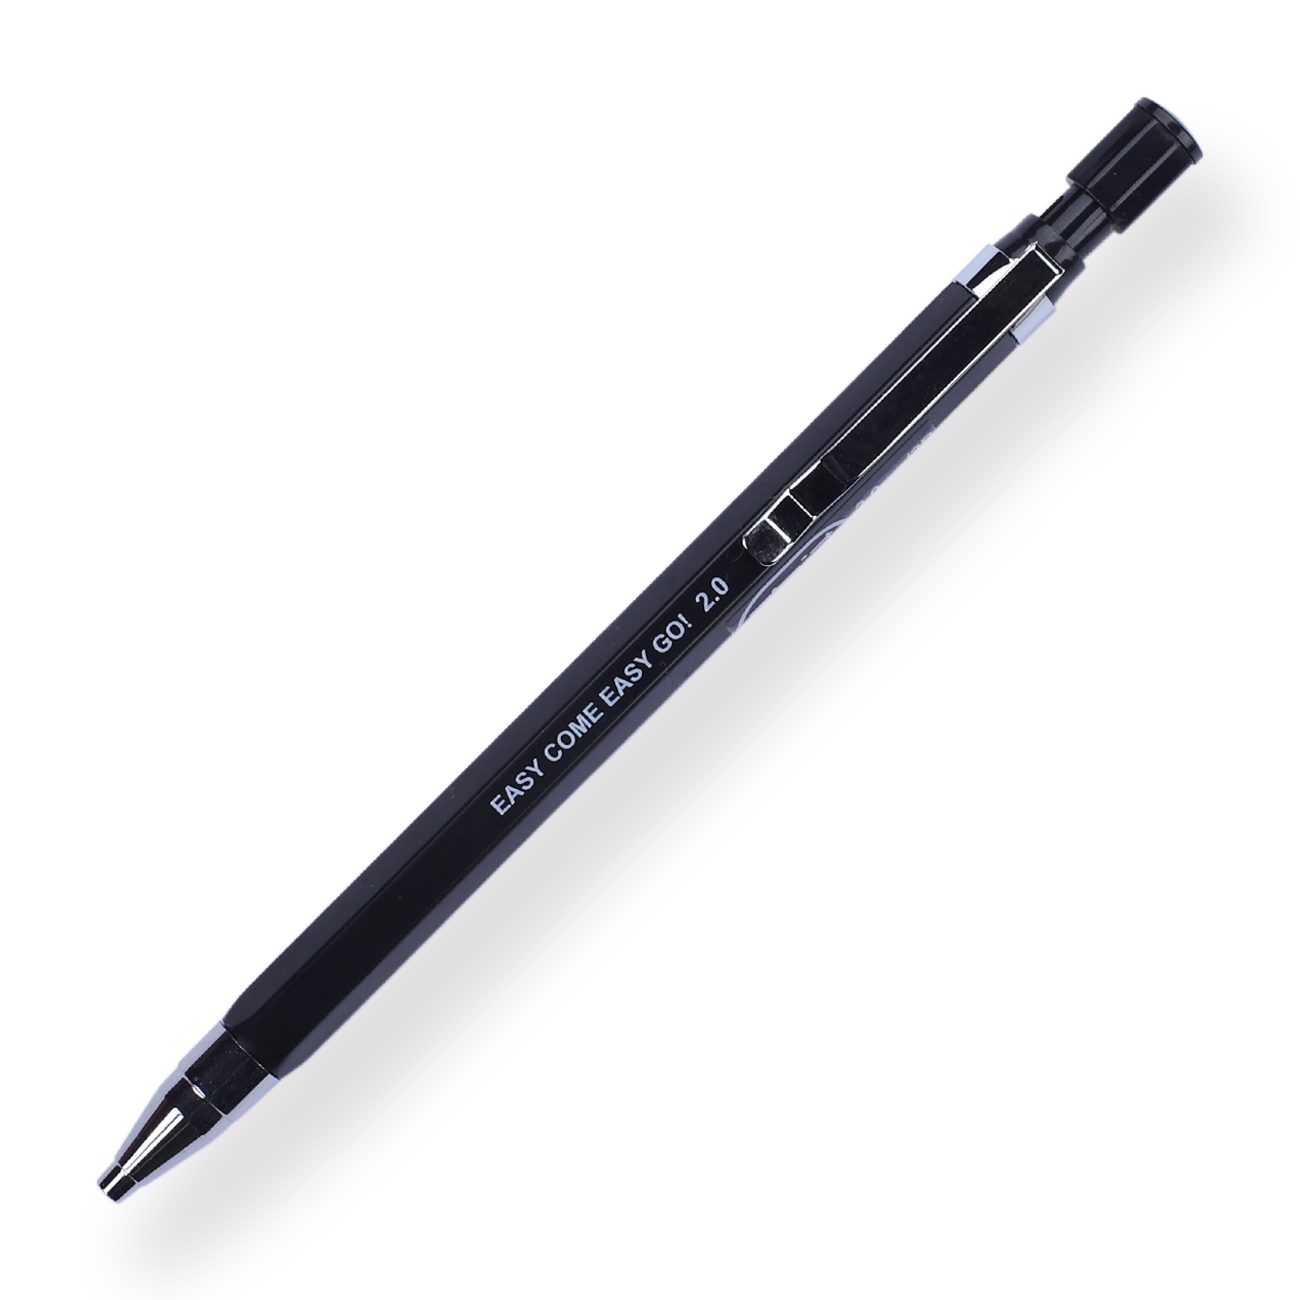 Mechanical Pencil with Built-in Sharpener - 2.0 mm - Black - Stationery Pal